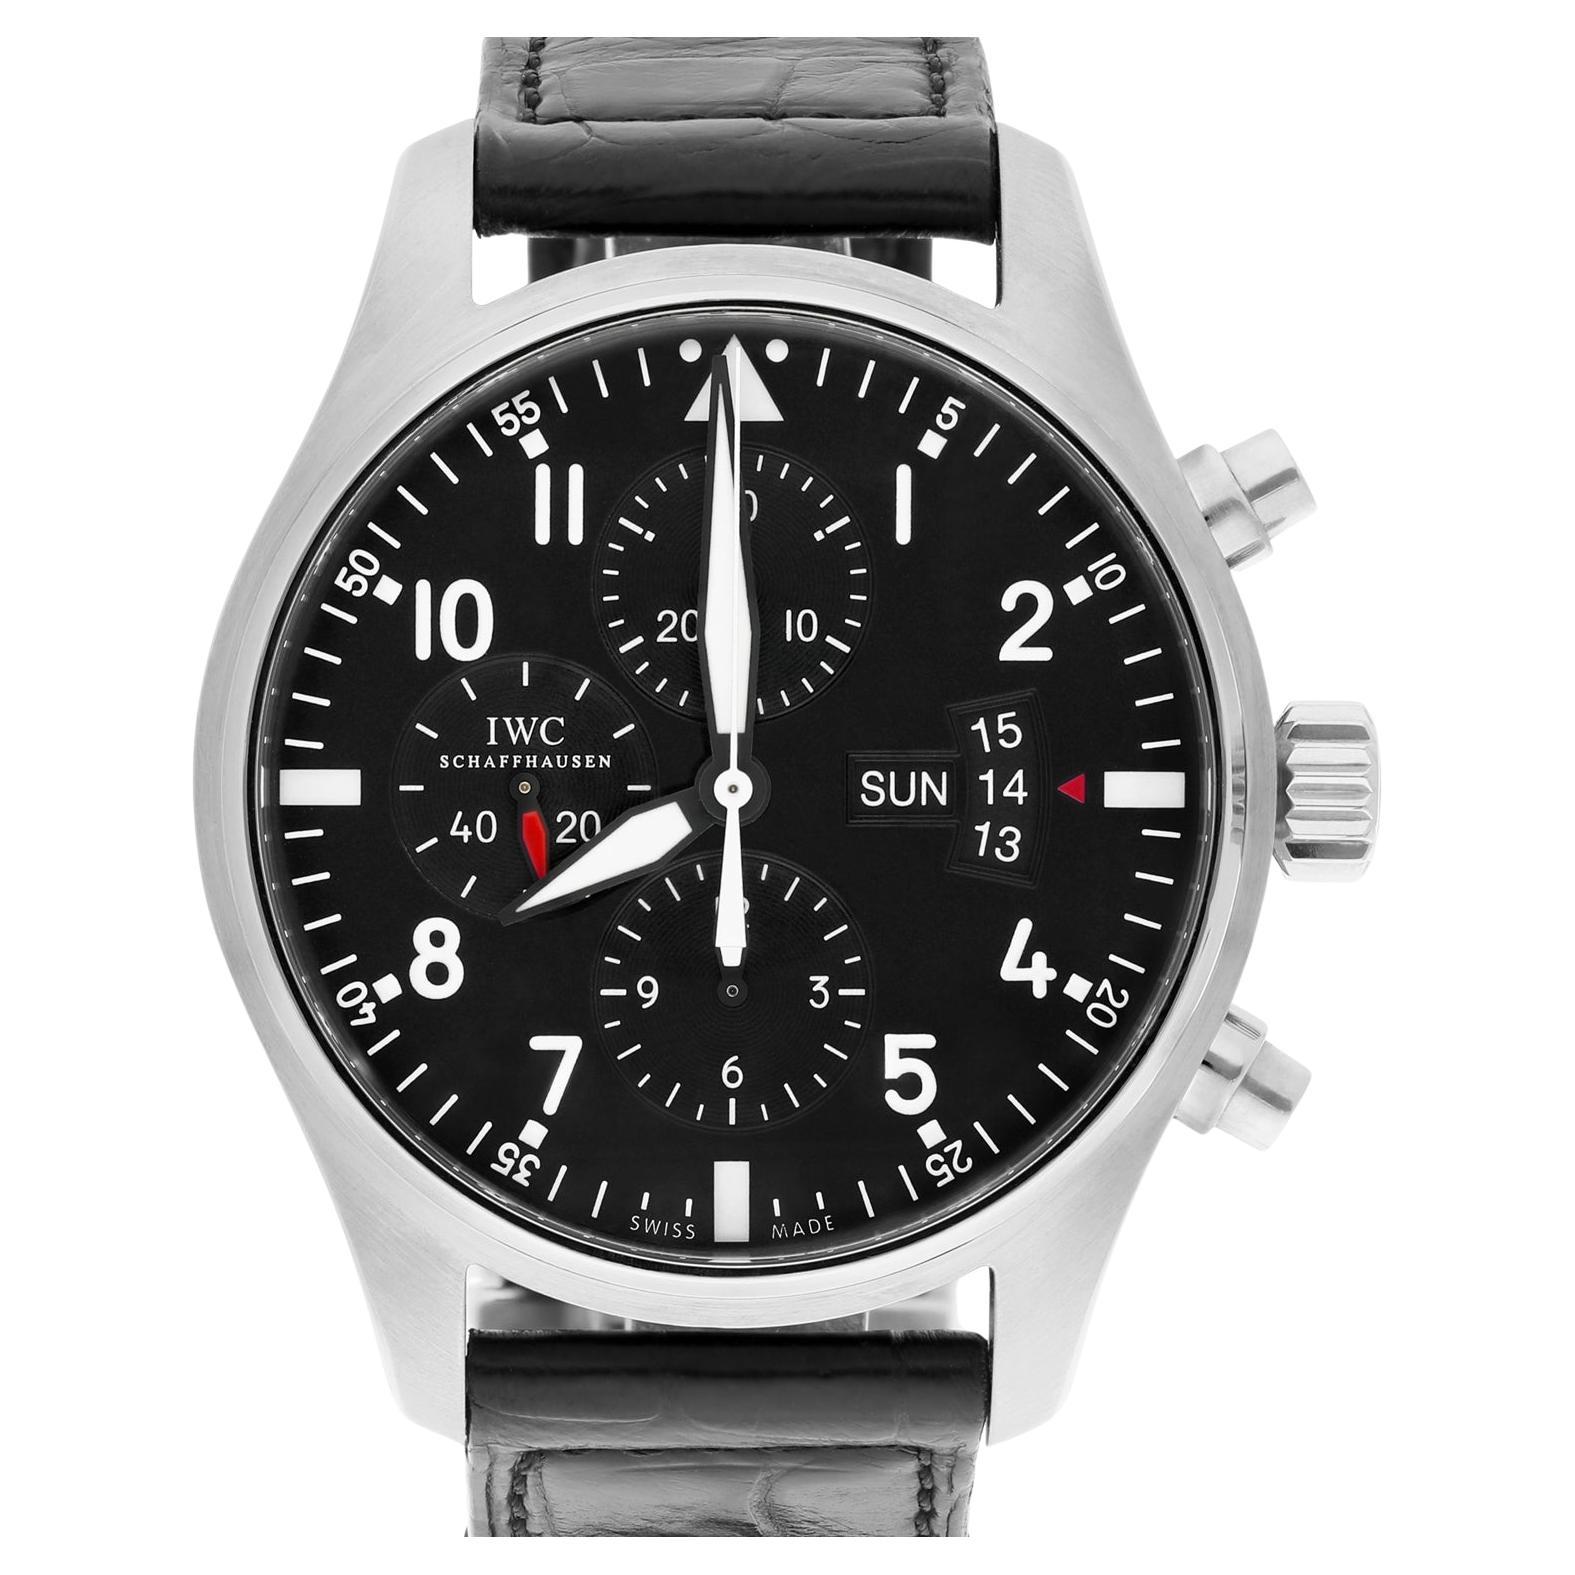 IWC Pilot watch IW377701 Chronograph Stainless Steel Mens Watch Leather Band